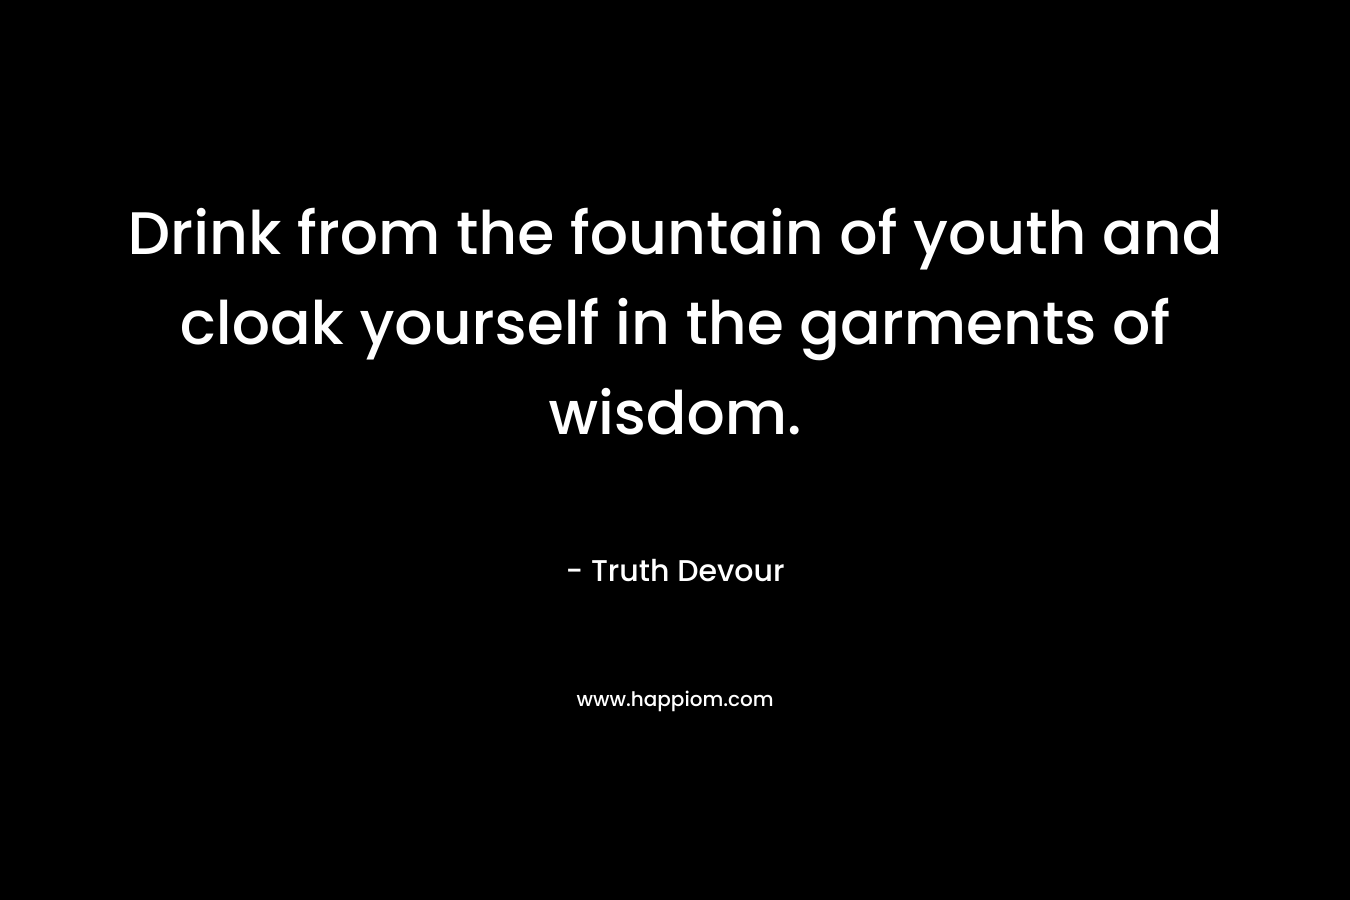 Drink from the fountain of youth and cloak yourself in the garments of wisdom. – Truth Devour